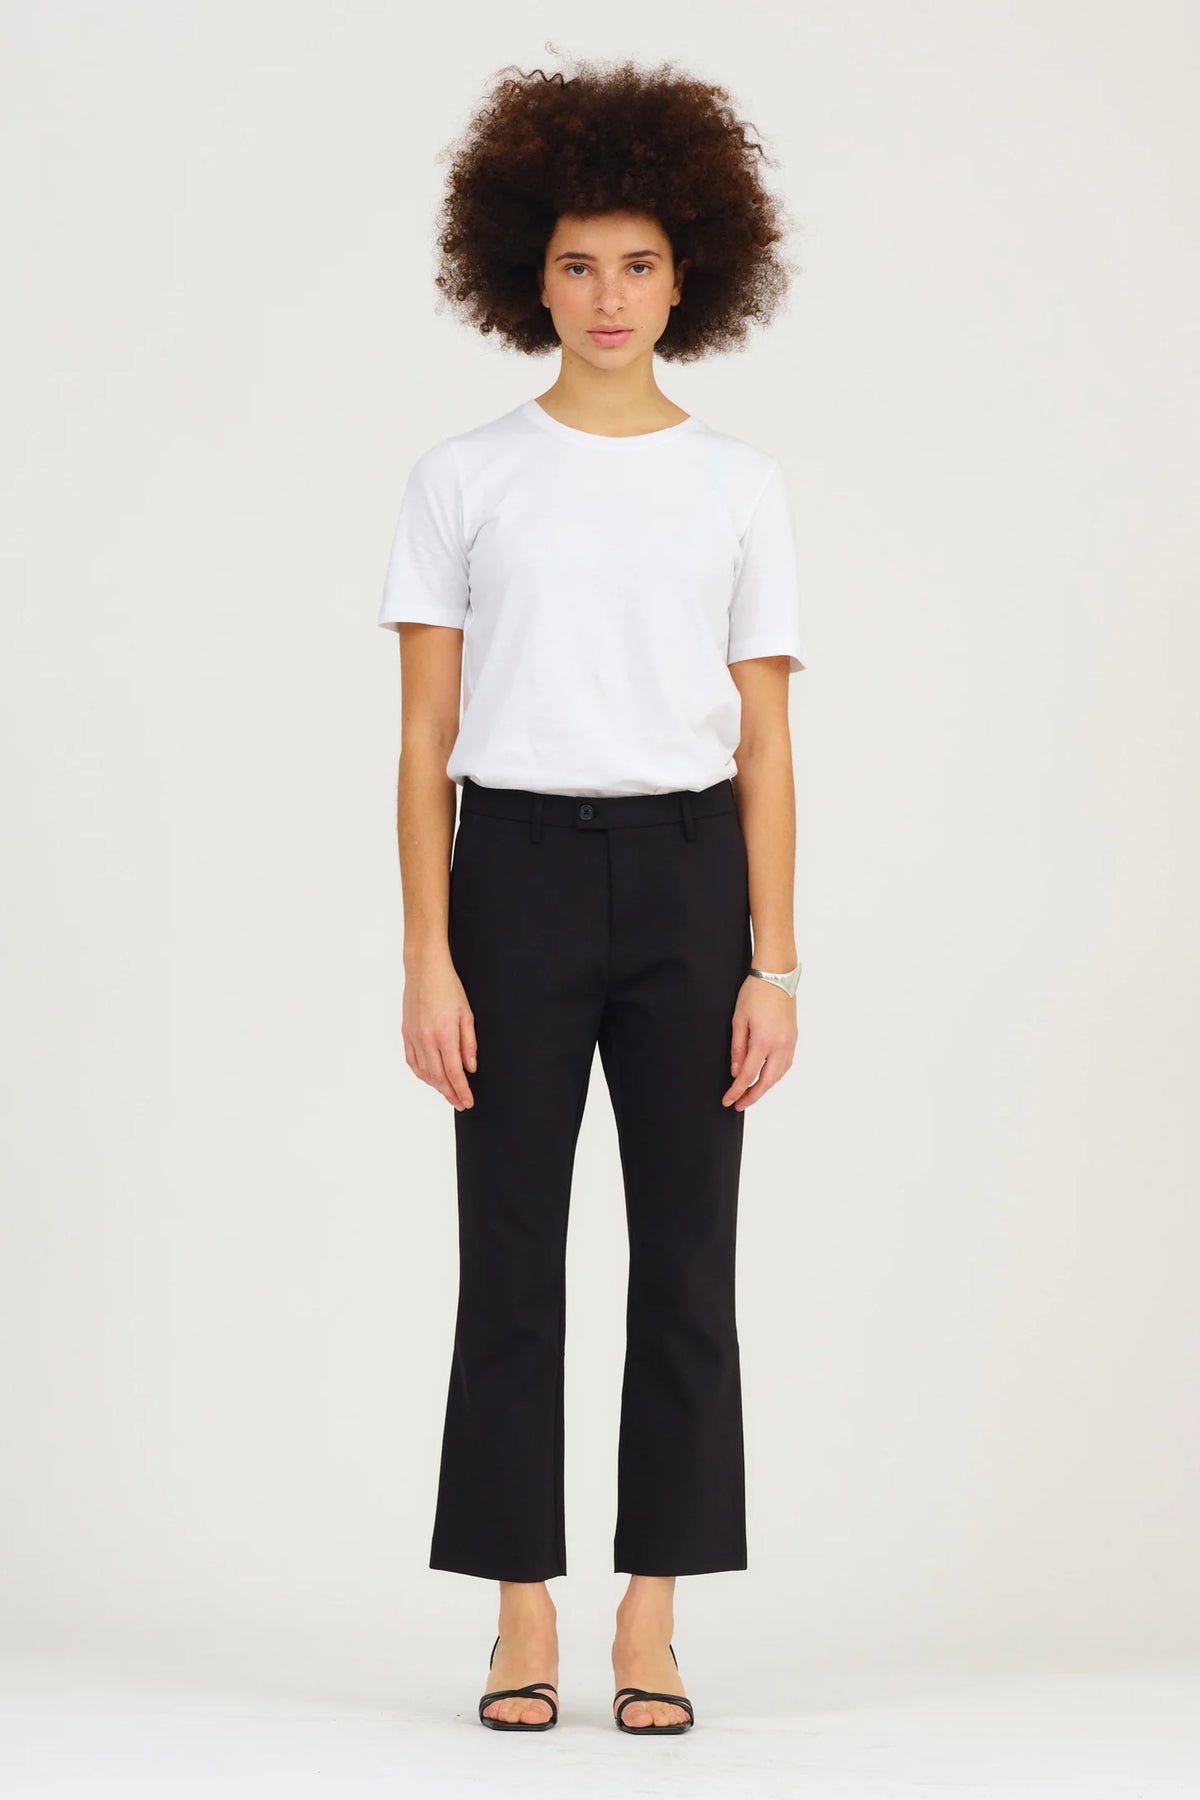 IVY Alice Cropped Flare Pant